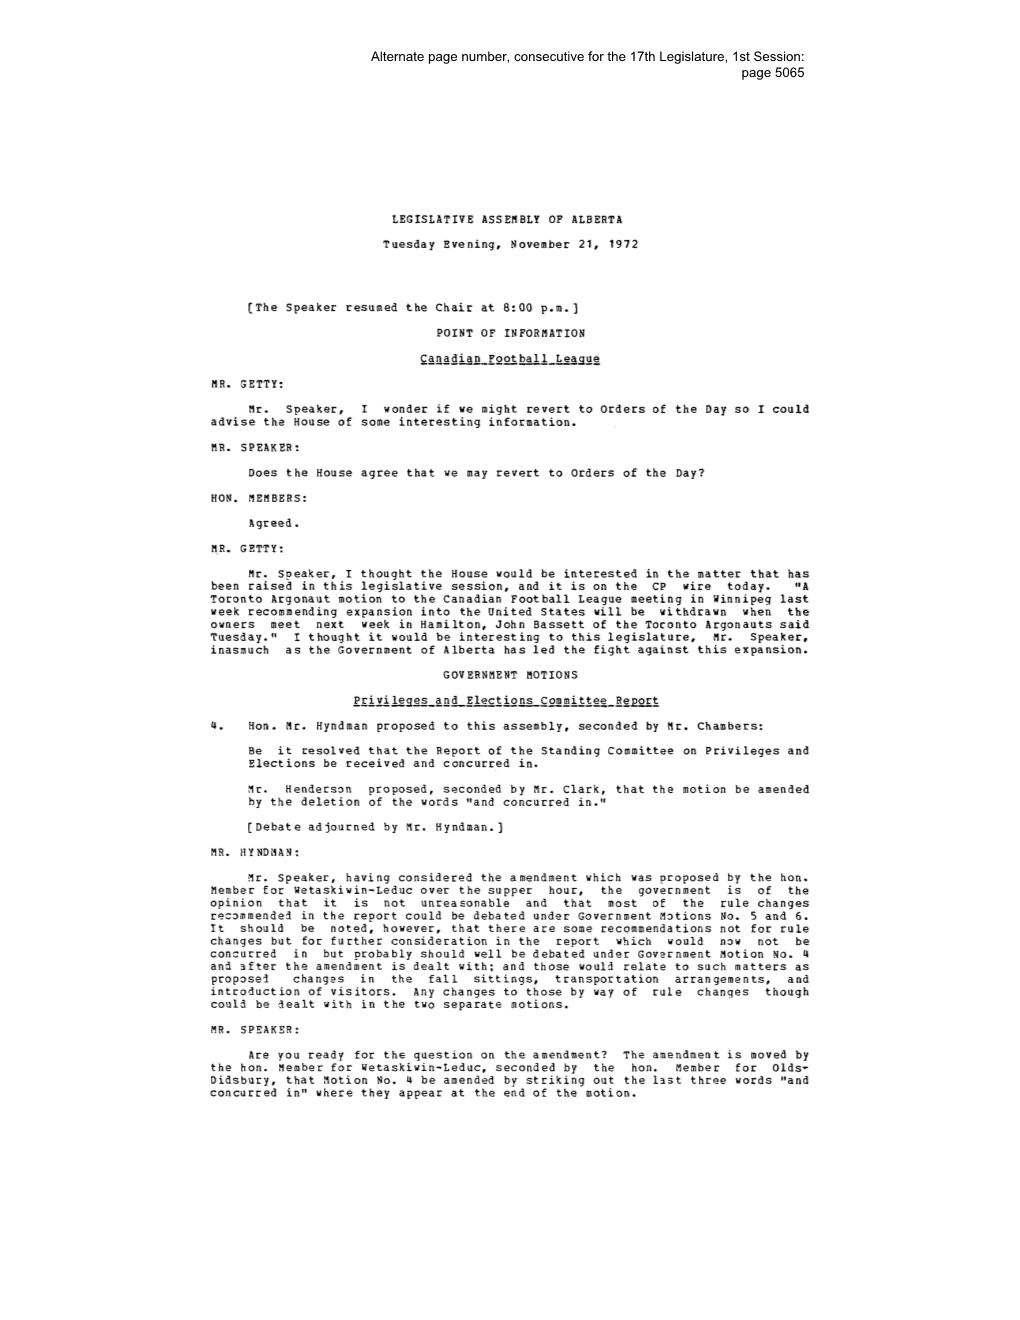 Alternate Page Number, Consecutive for the 17Th Legislature, 1St Session: Page 5065